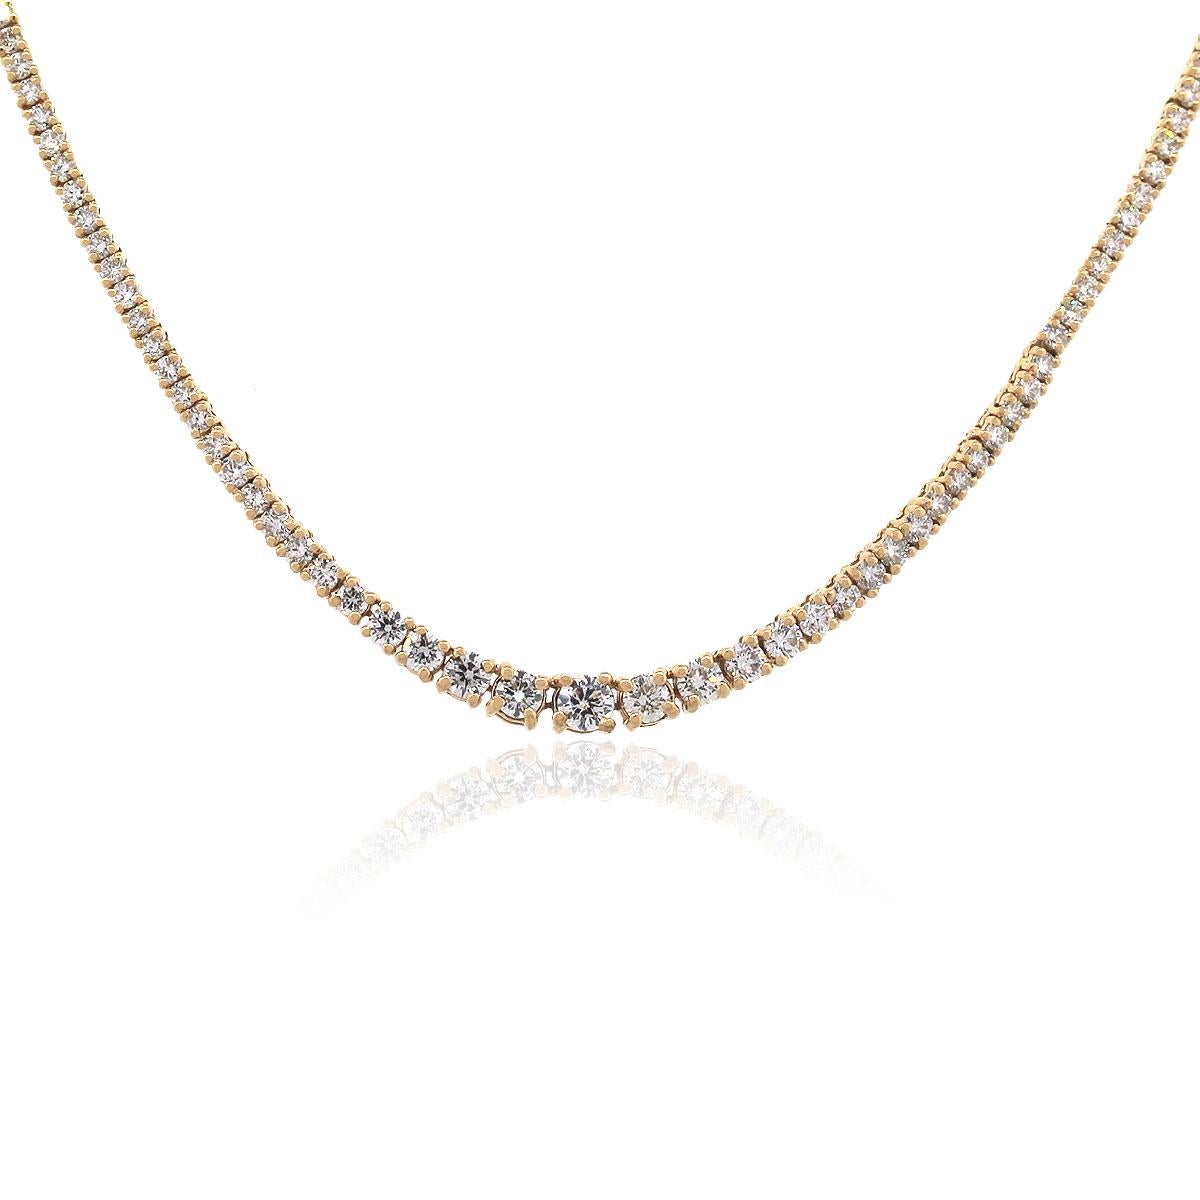 Material: 14k Rose Gold
Diamond Details: Approx. 3.30ctw of round cut Diamonds. Diamonds are G/H in color and SI in clarity.
Measurements: Necklace measures 34″
Fastening: Lariat Style Closure
Item Weight: 15.2g (9.8dwt)
SKU: A30312421